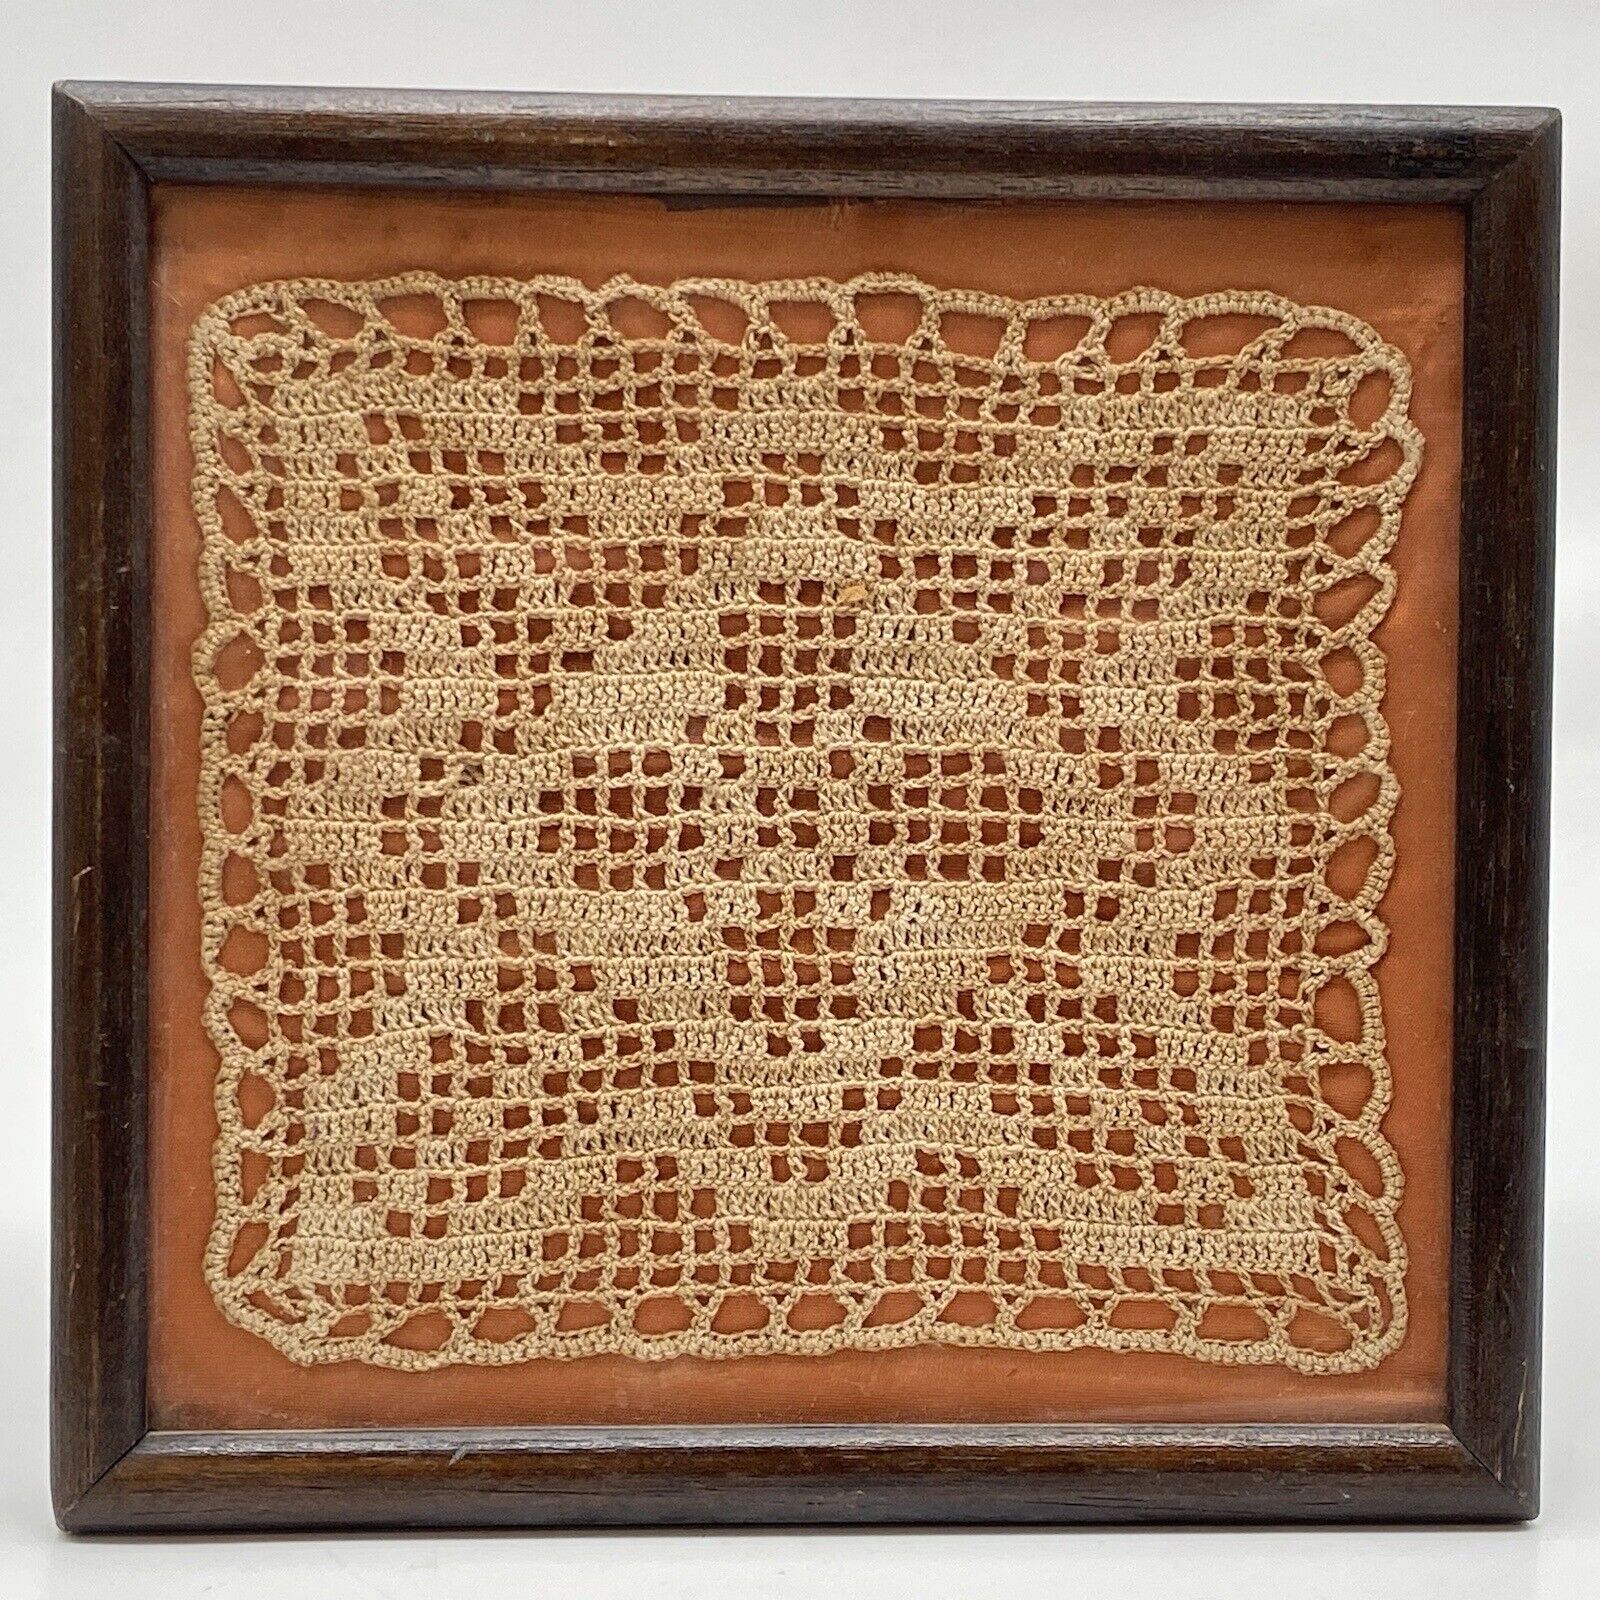 Vintage or Antique Textile: Crocheted Doily, ￼Snowflake Pattern Framed R1